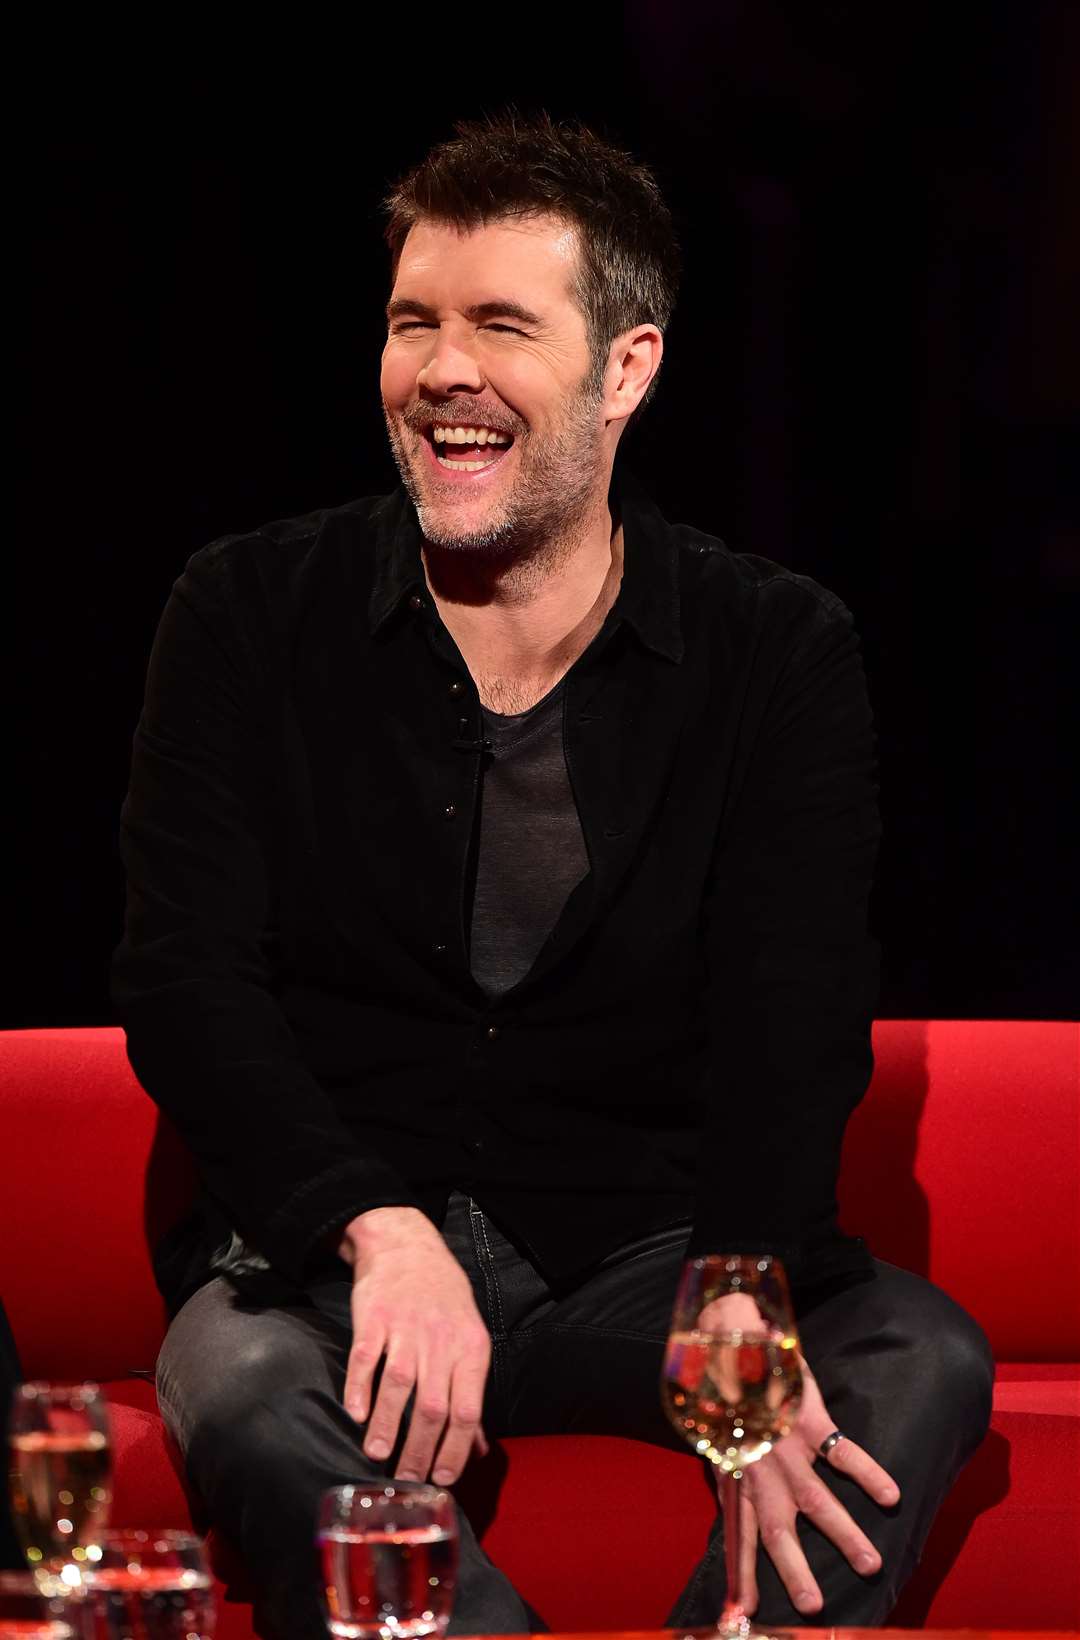 Rhod Gilbert said he is committed to using his experience of cancer in his next stand-up shows (Ian West/PA)